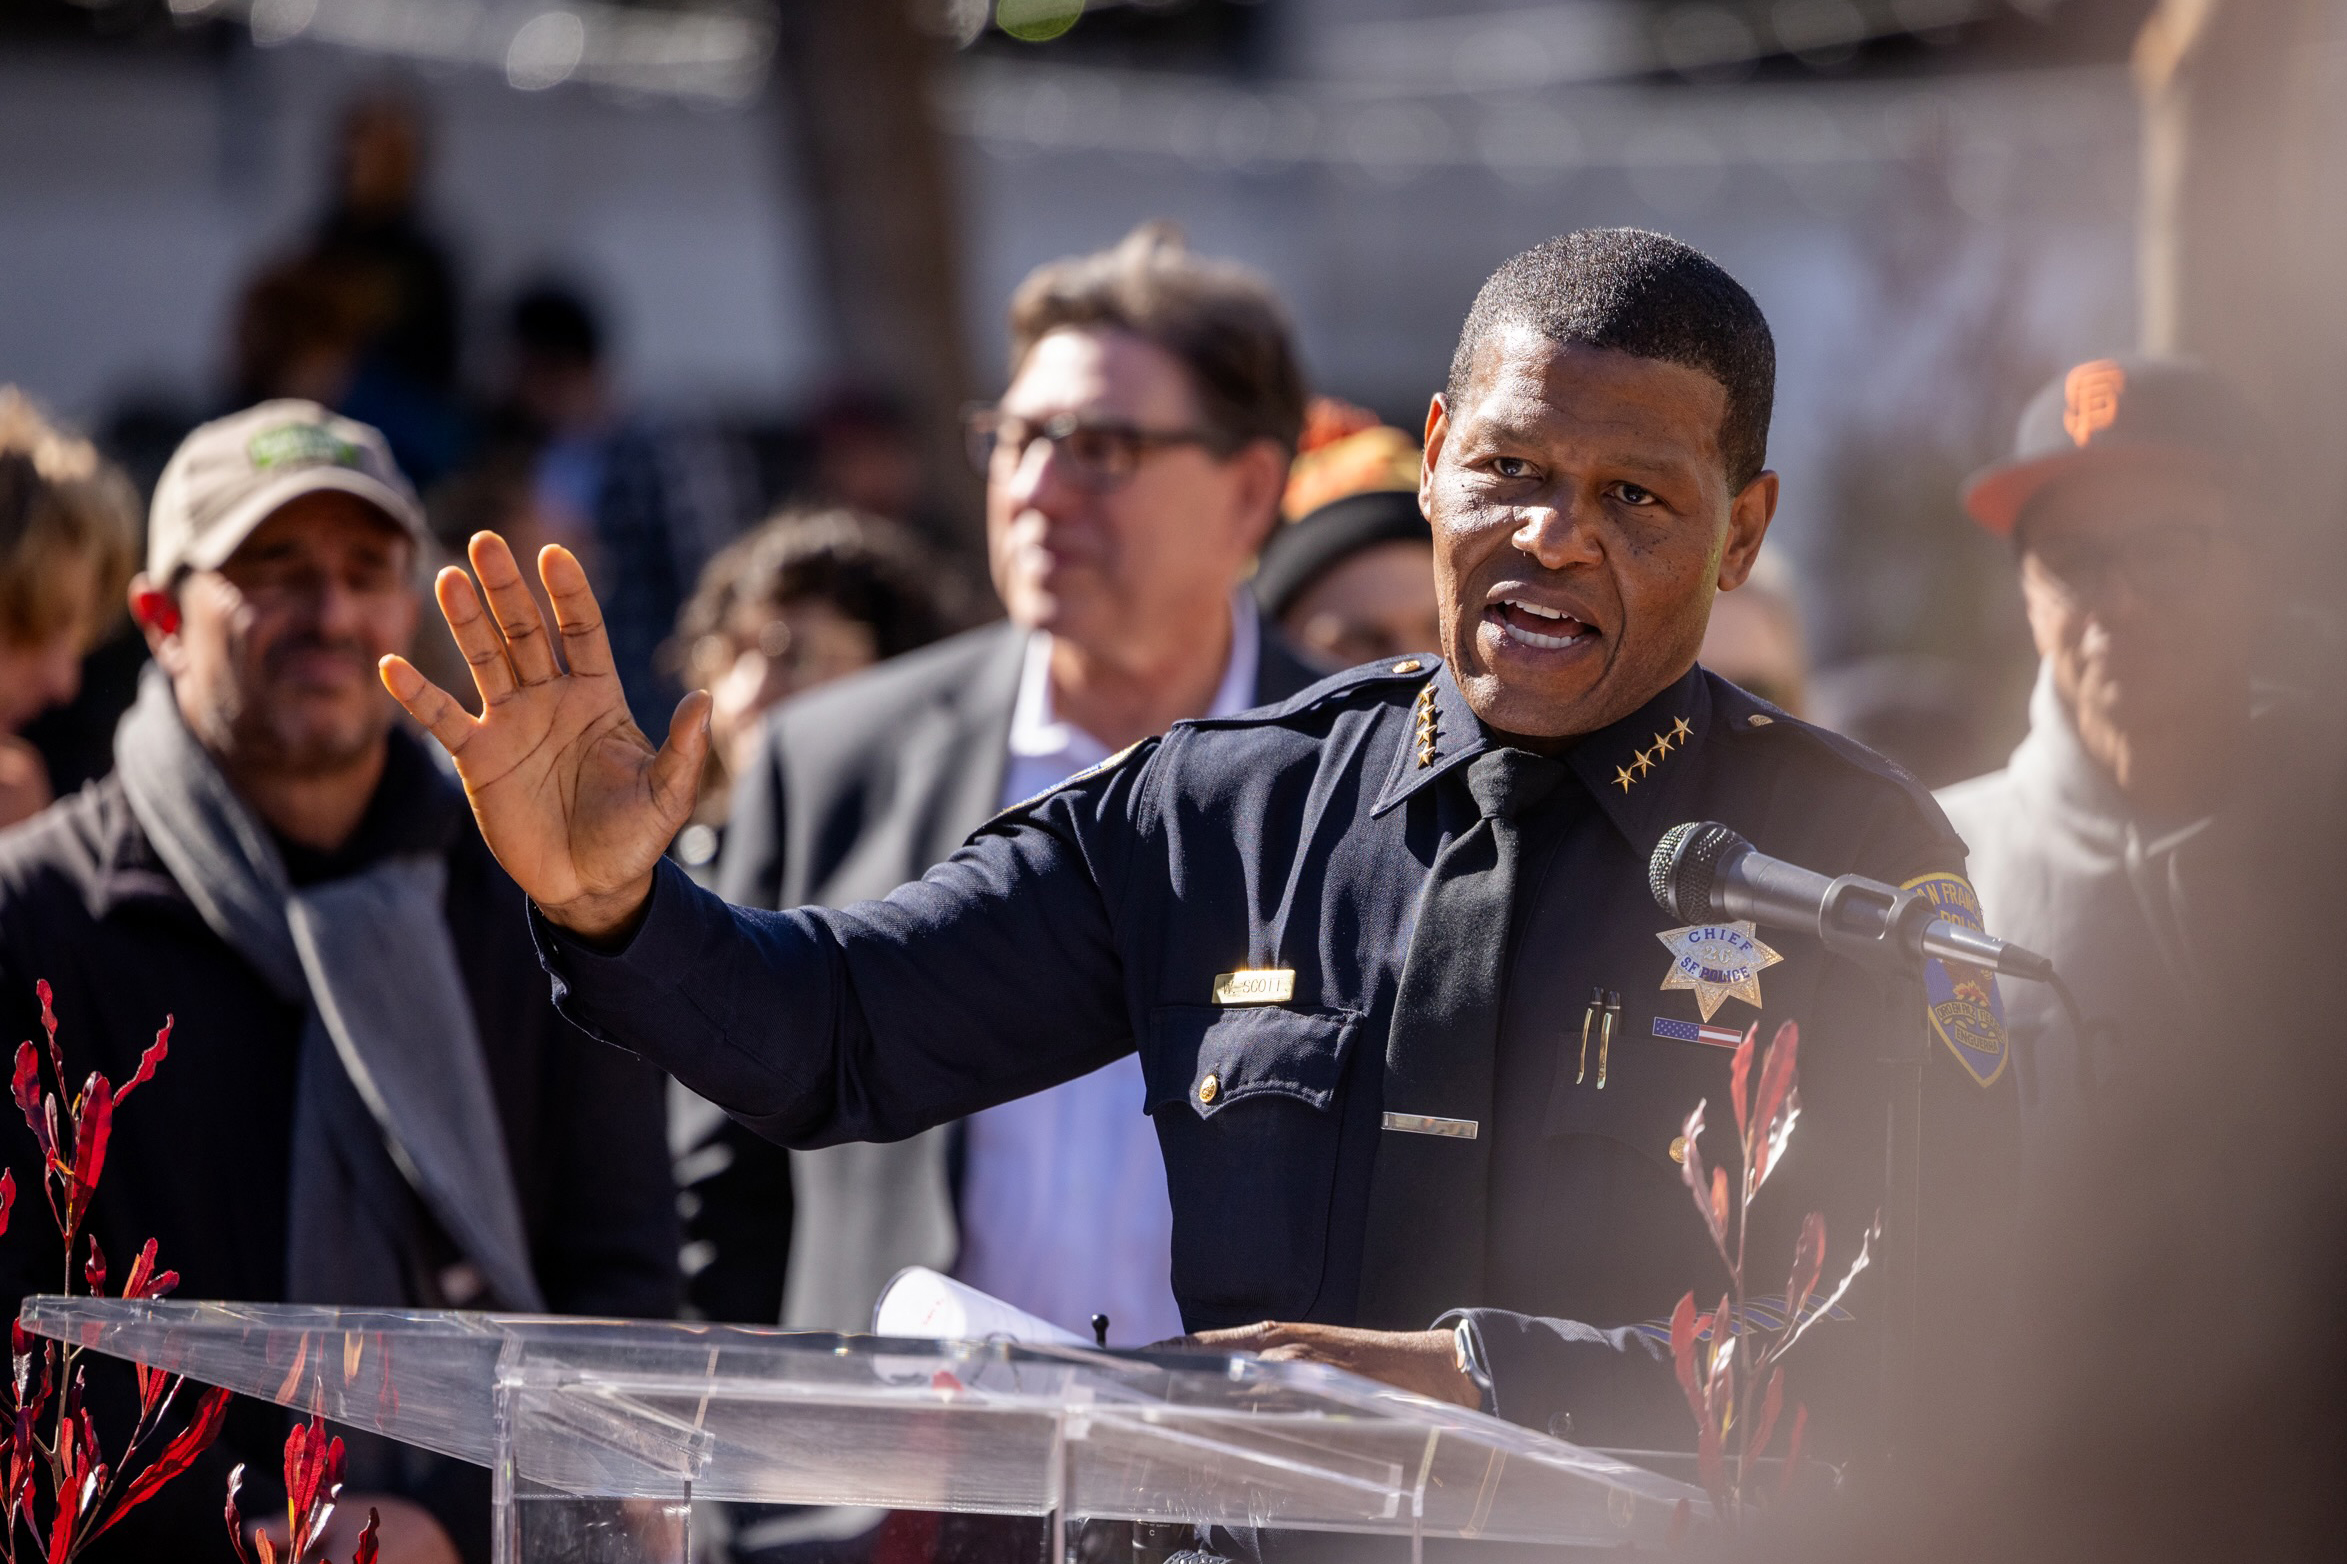 San Francisco Police Department Police Chief Bill Scott, wearing a police uniform holds out his right hand as he gives as speech to a group of people during a press conference to celebrate the reopening of the U.N Plaza which included a skateboard park.